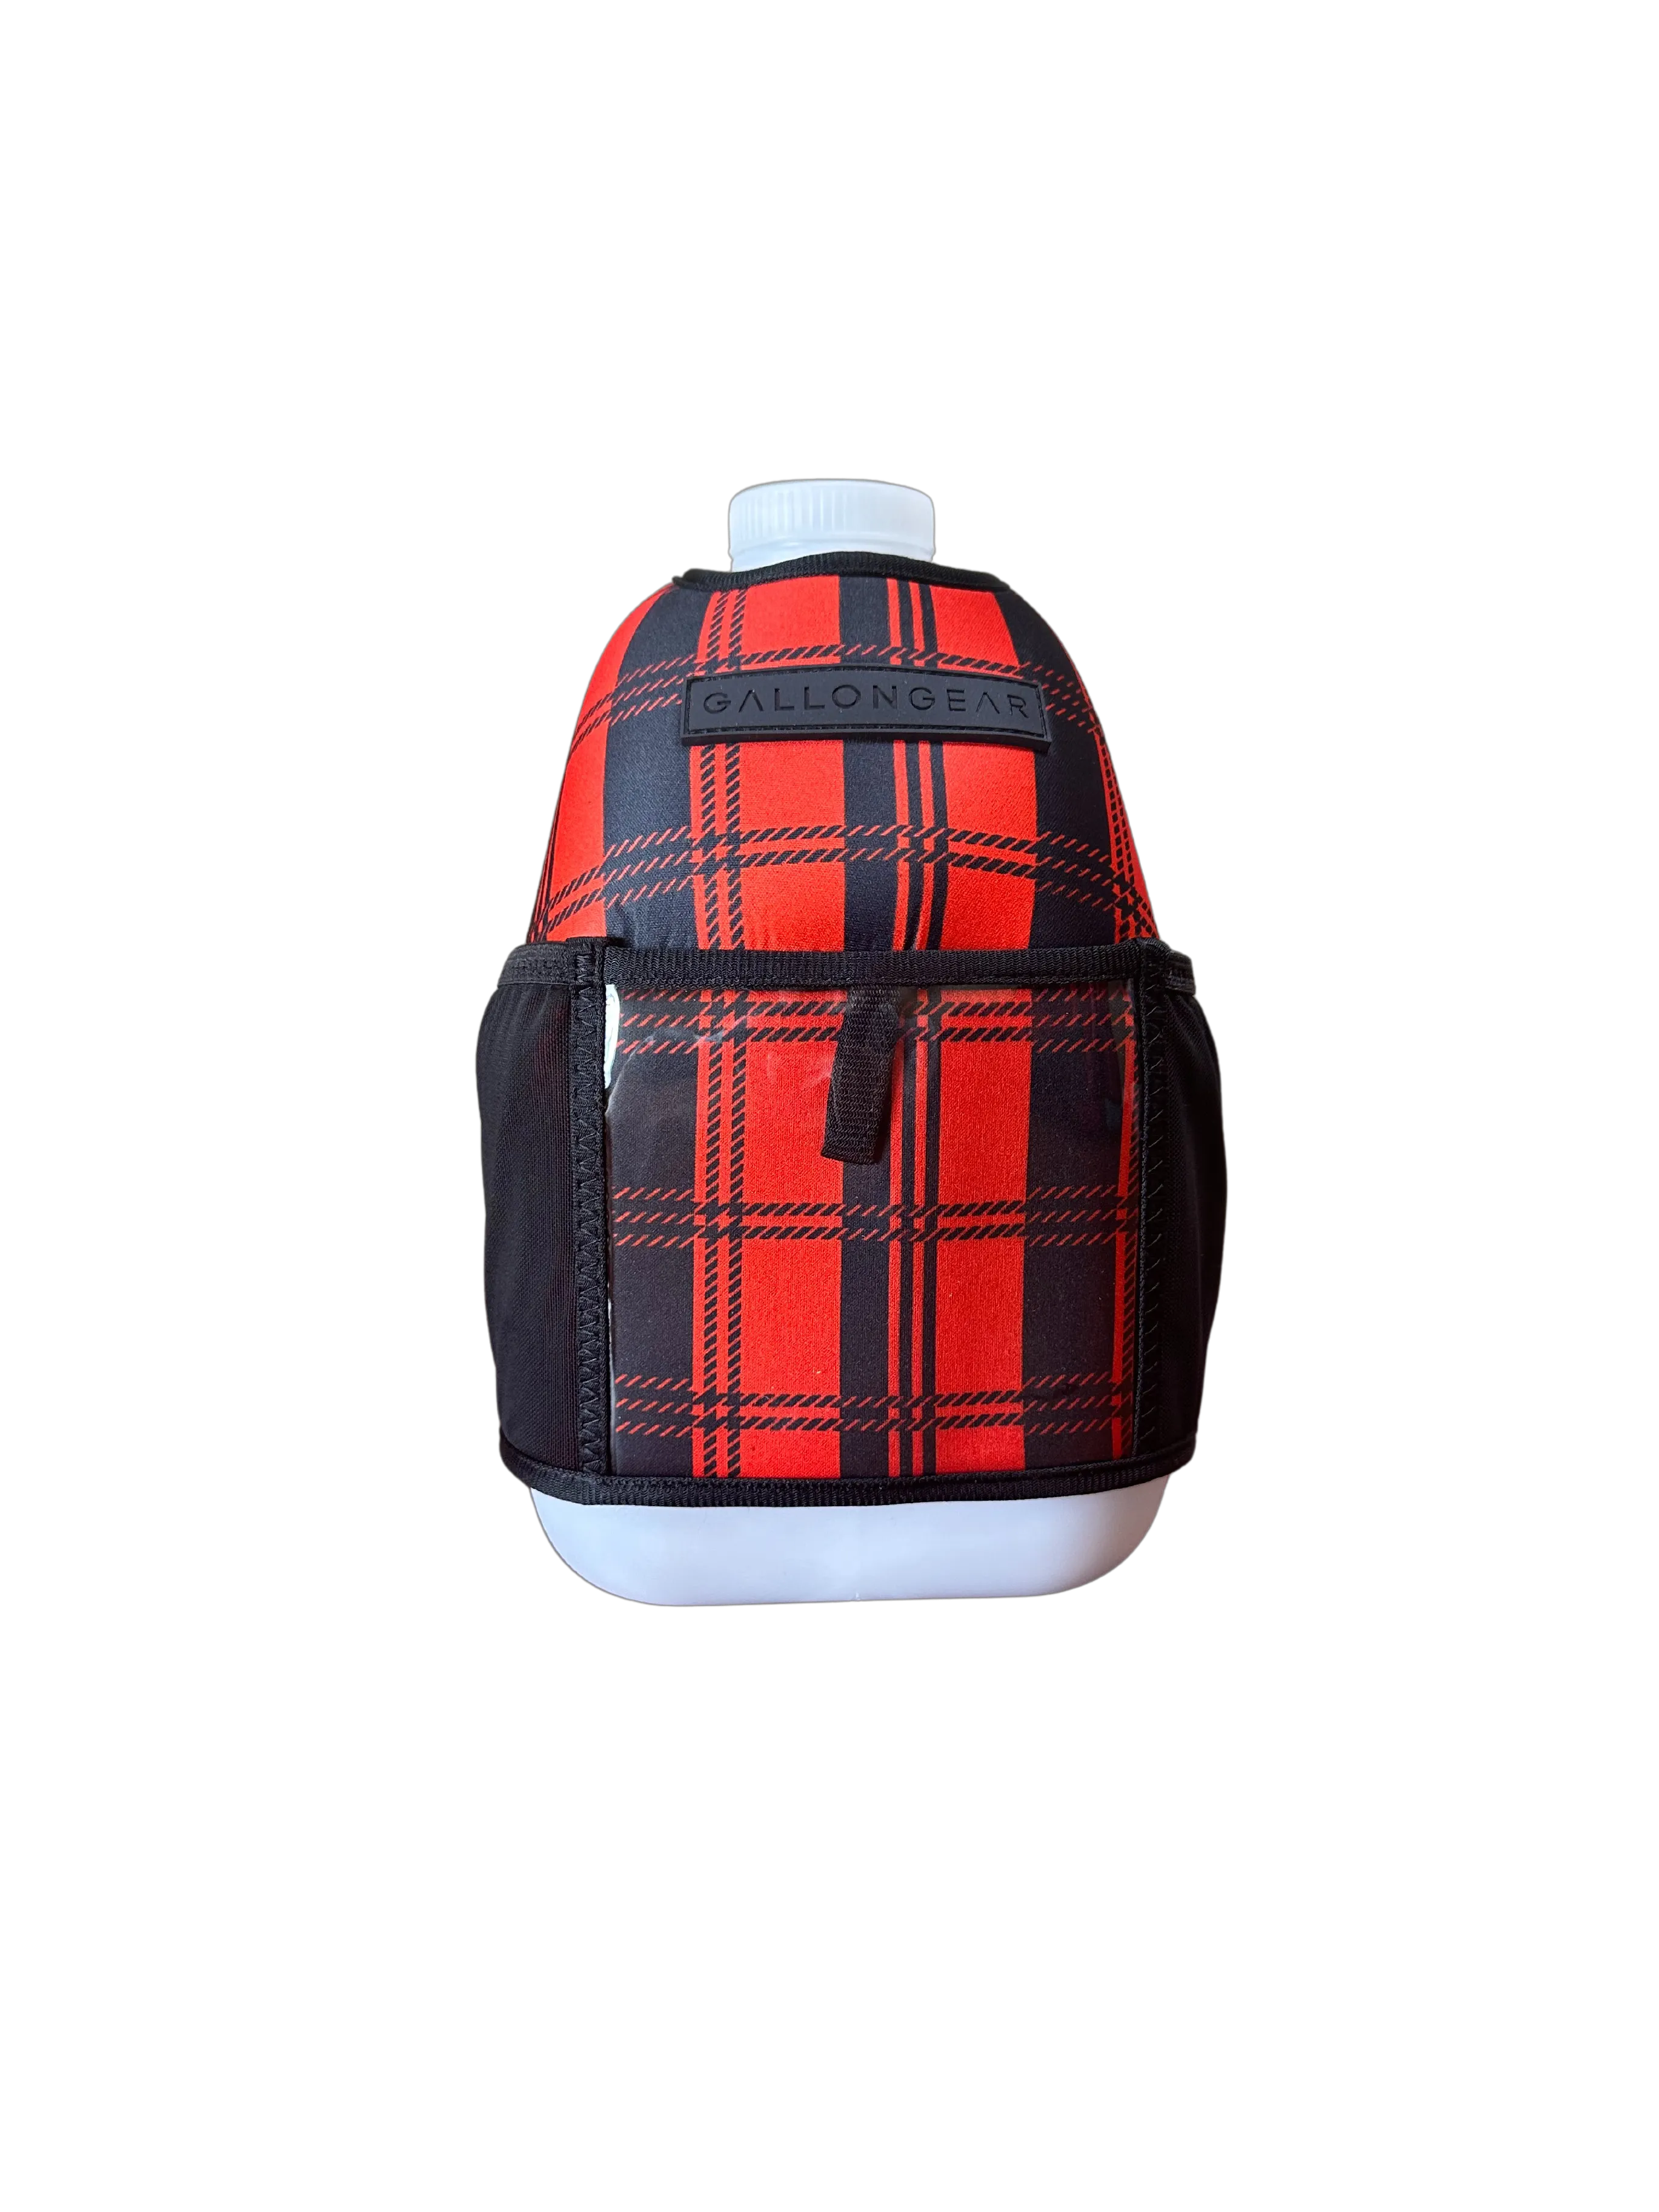 (1 GALLON COMBO) White Jug / Red Plaid Booty